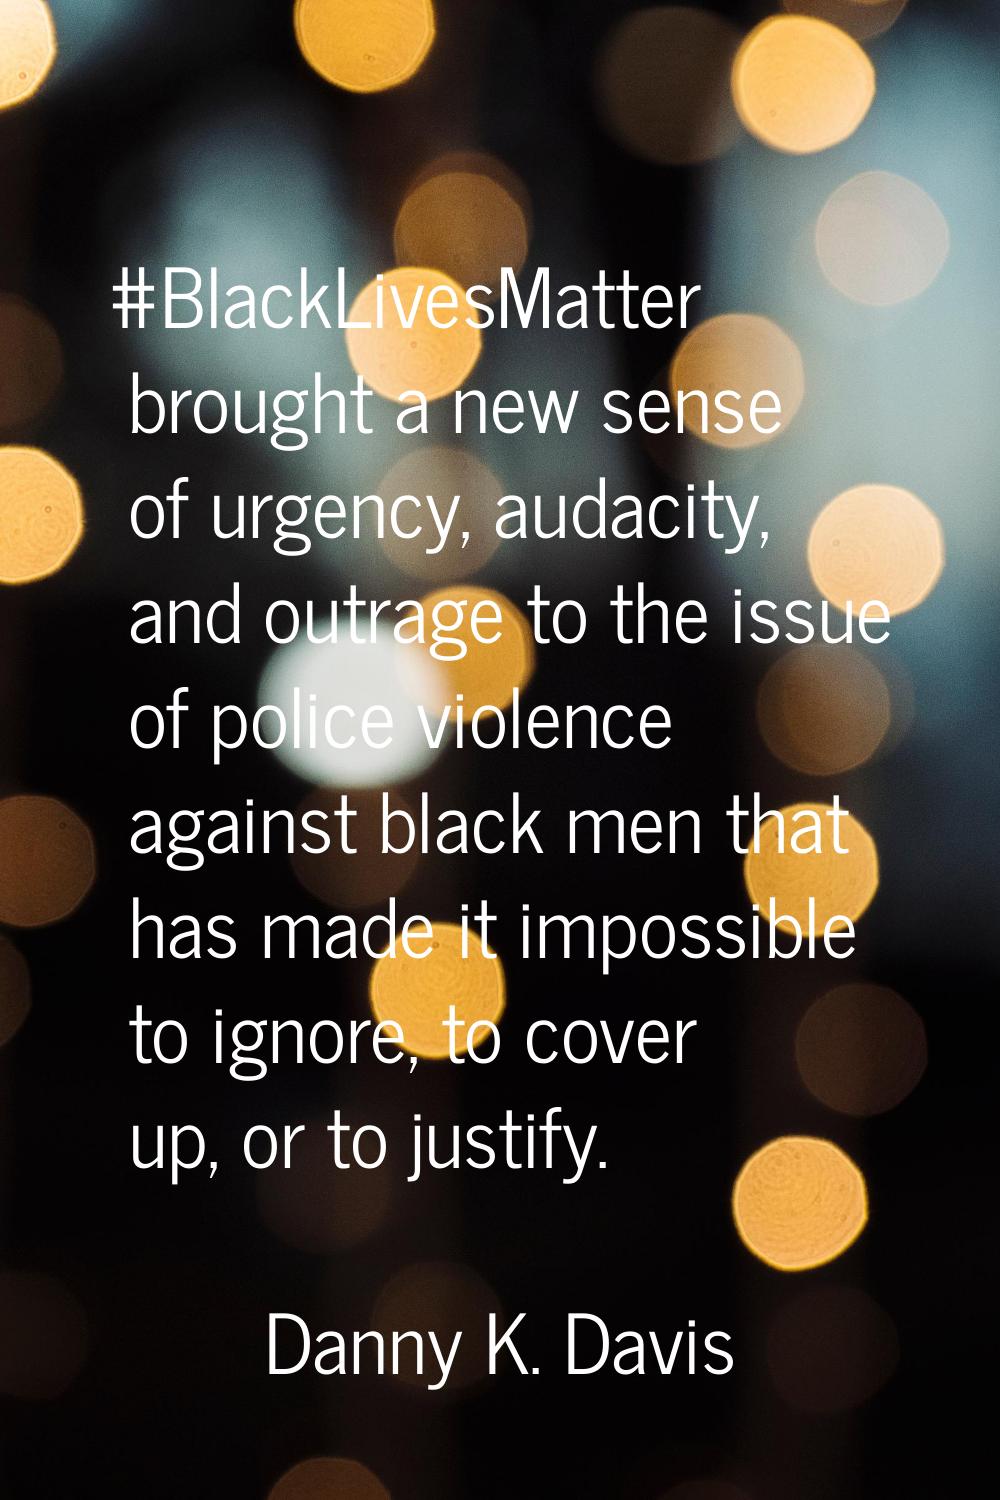 #BlackLivesMatter brought a new sense of urgency, audacity, and outrage to the issue of police viol